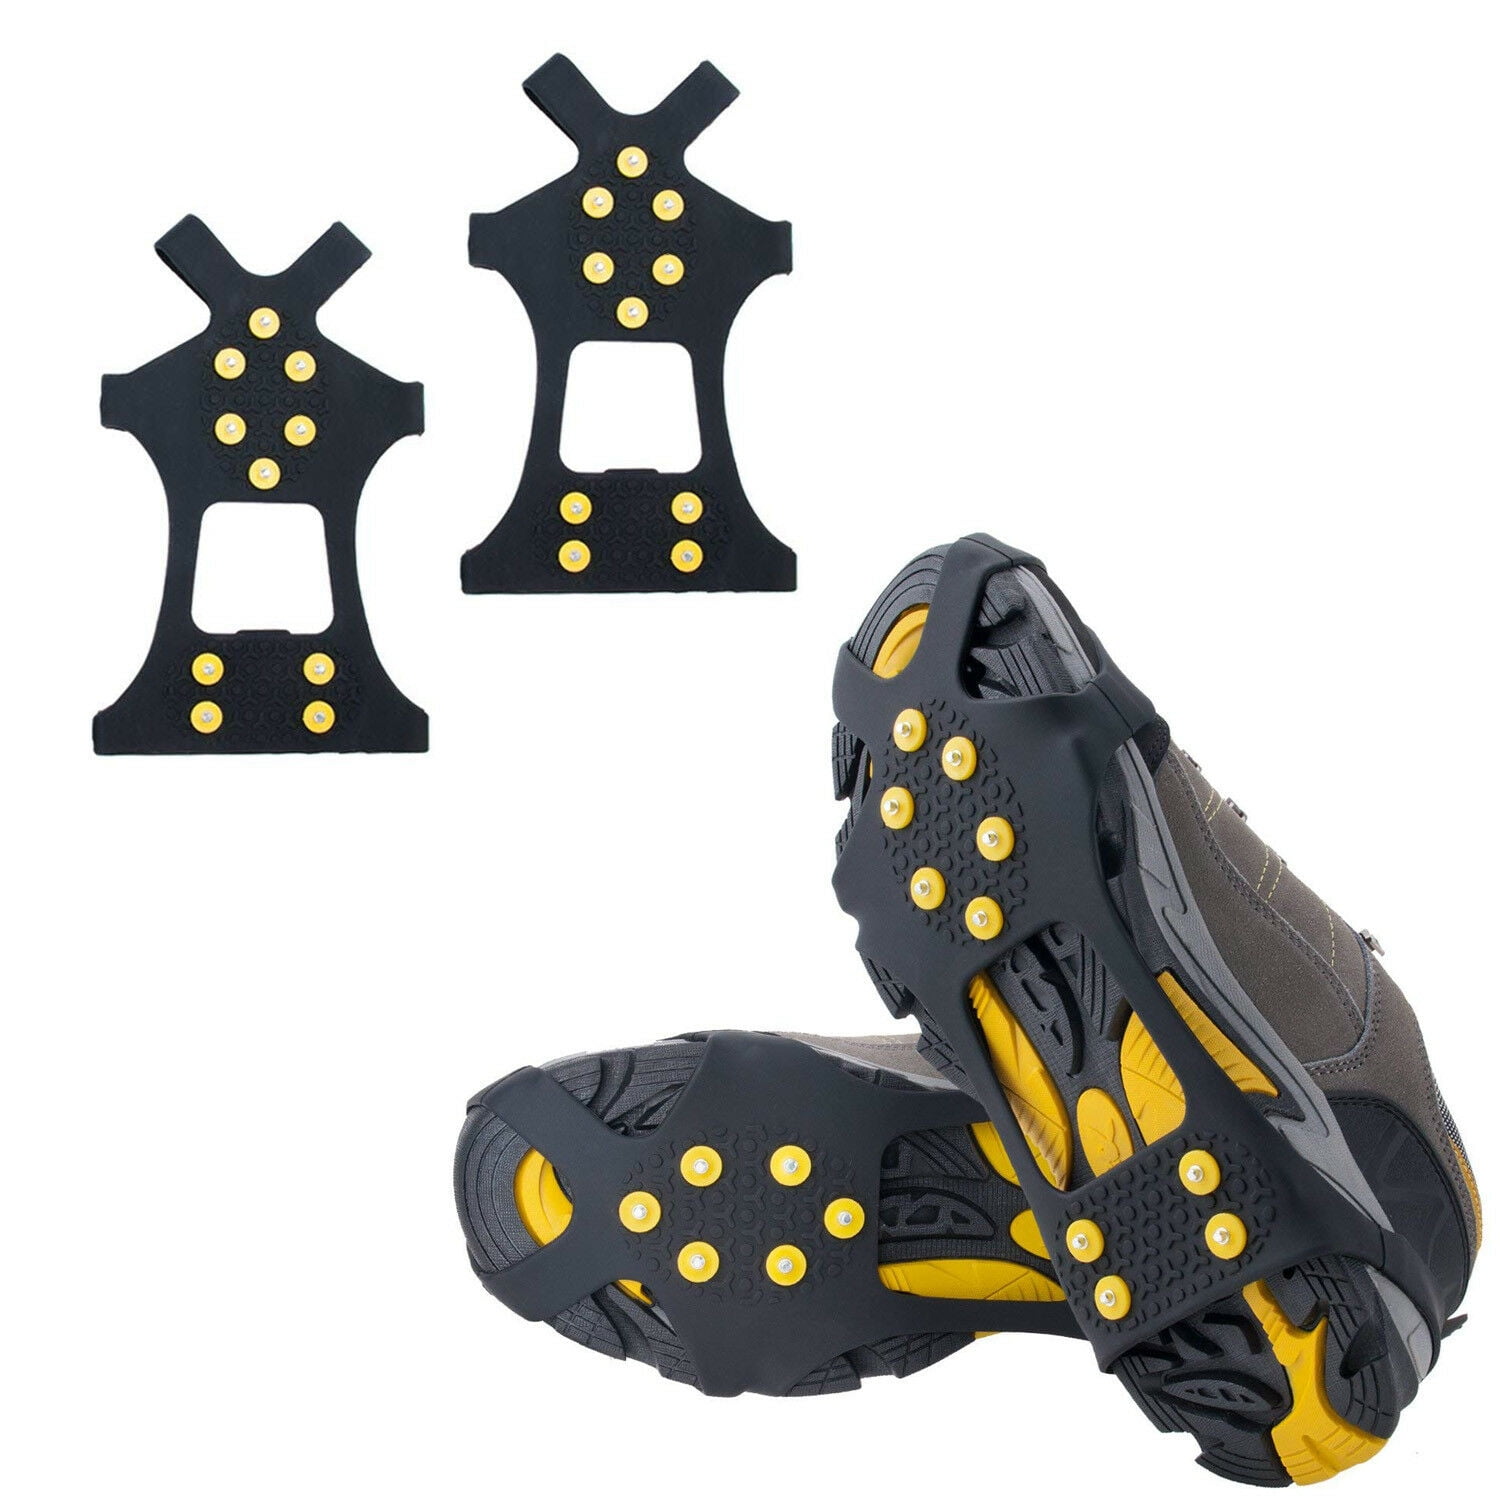 Snow Ice Climbing Grip Anti Slip Spike Crampons Boot Cover Shoes Gripper Cleat S 